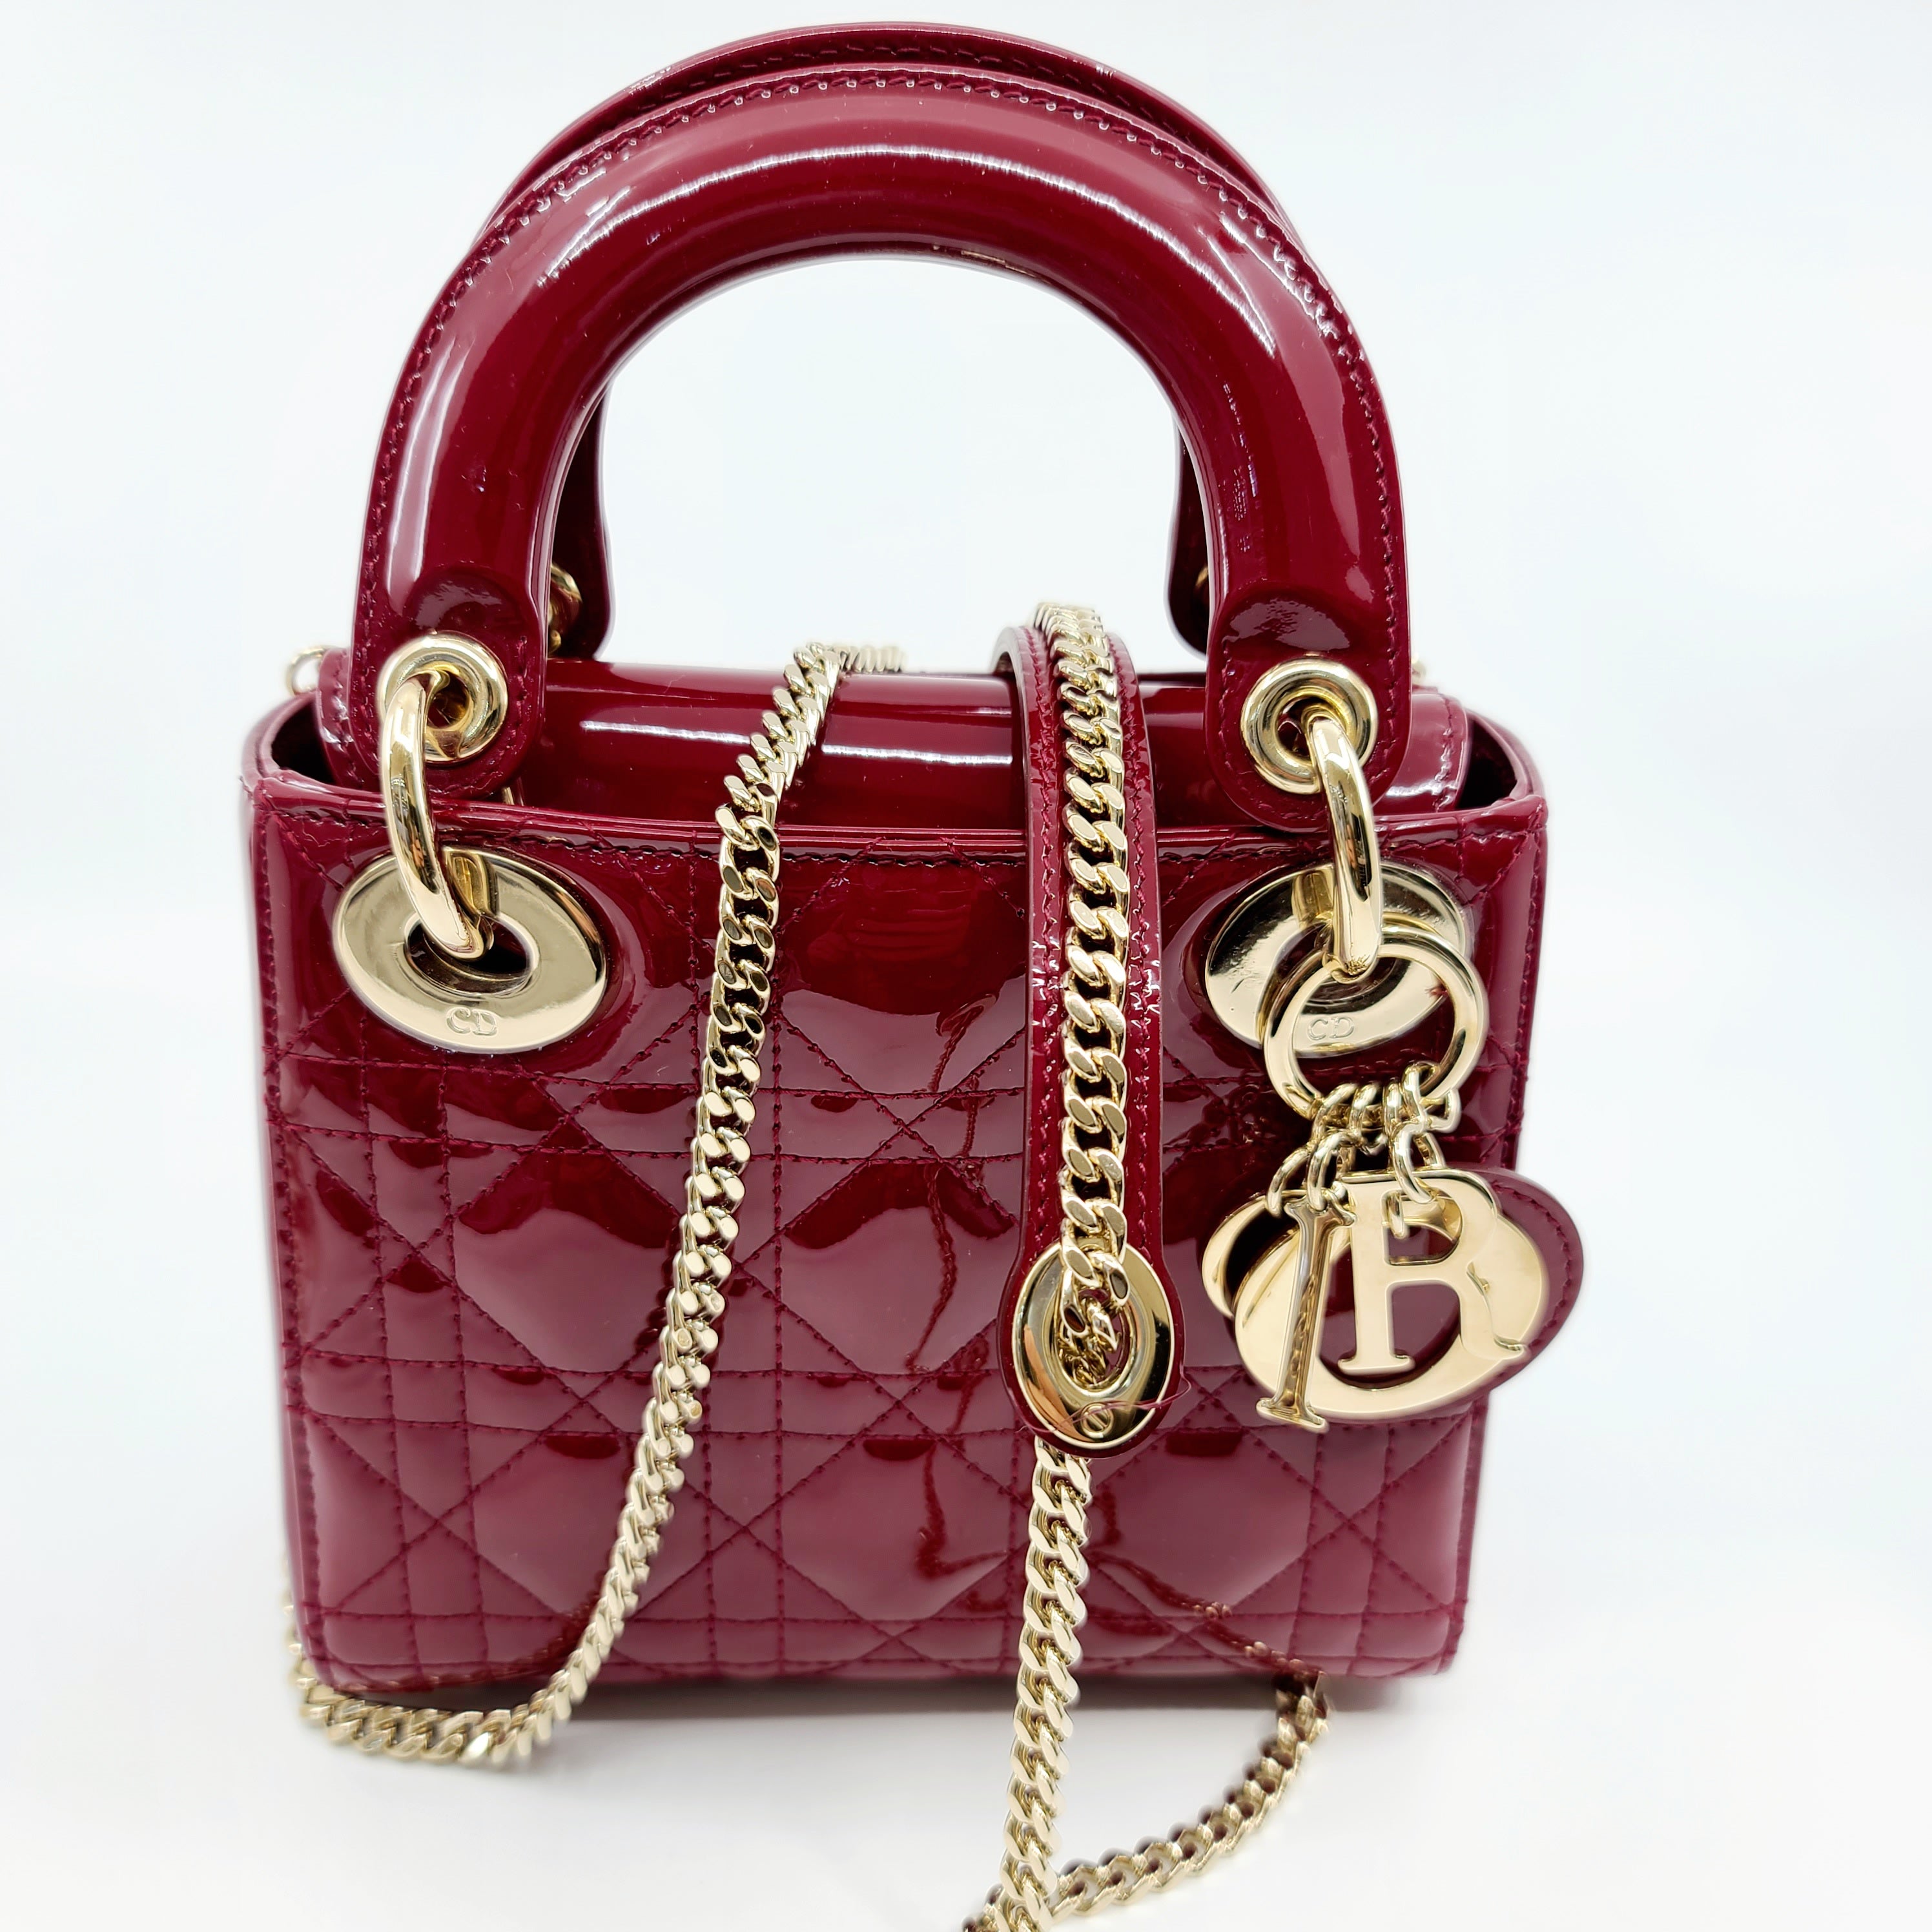 Brand New MINI LADY DIOR BAG Cherry Red Patent Cannage Calfskin Refere –